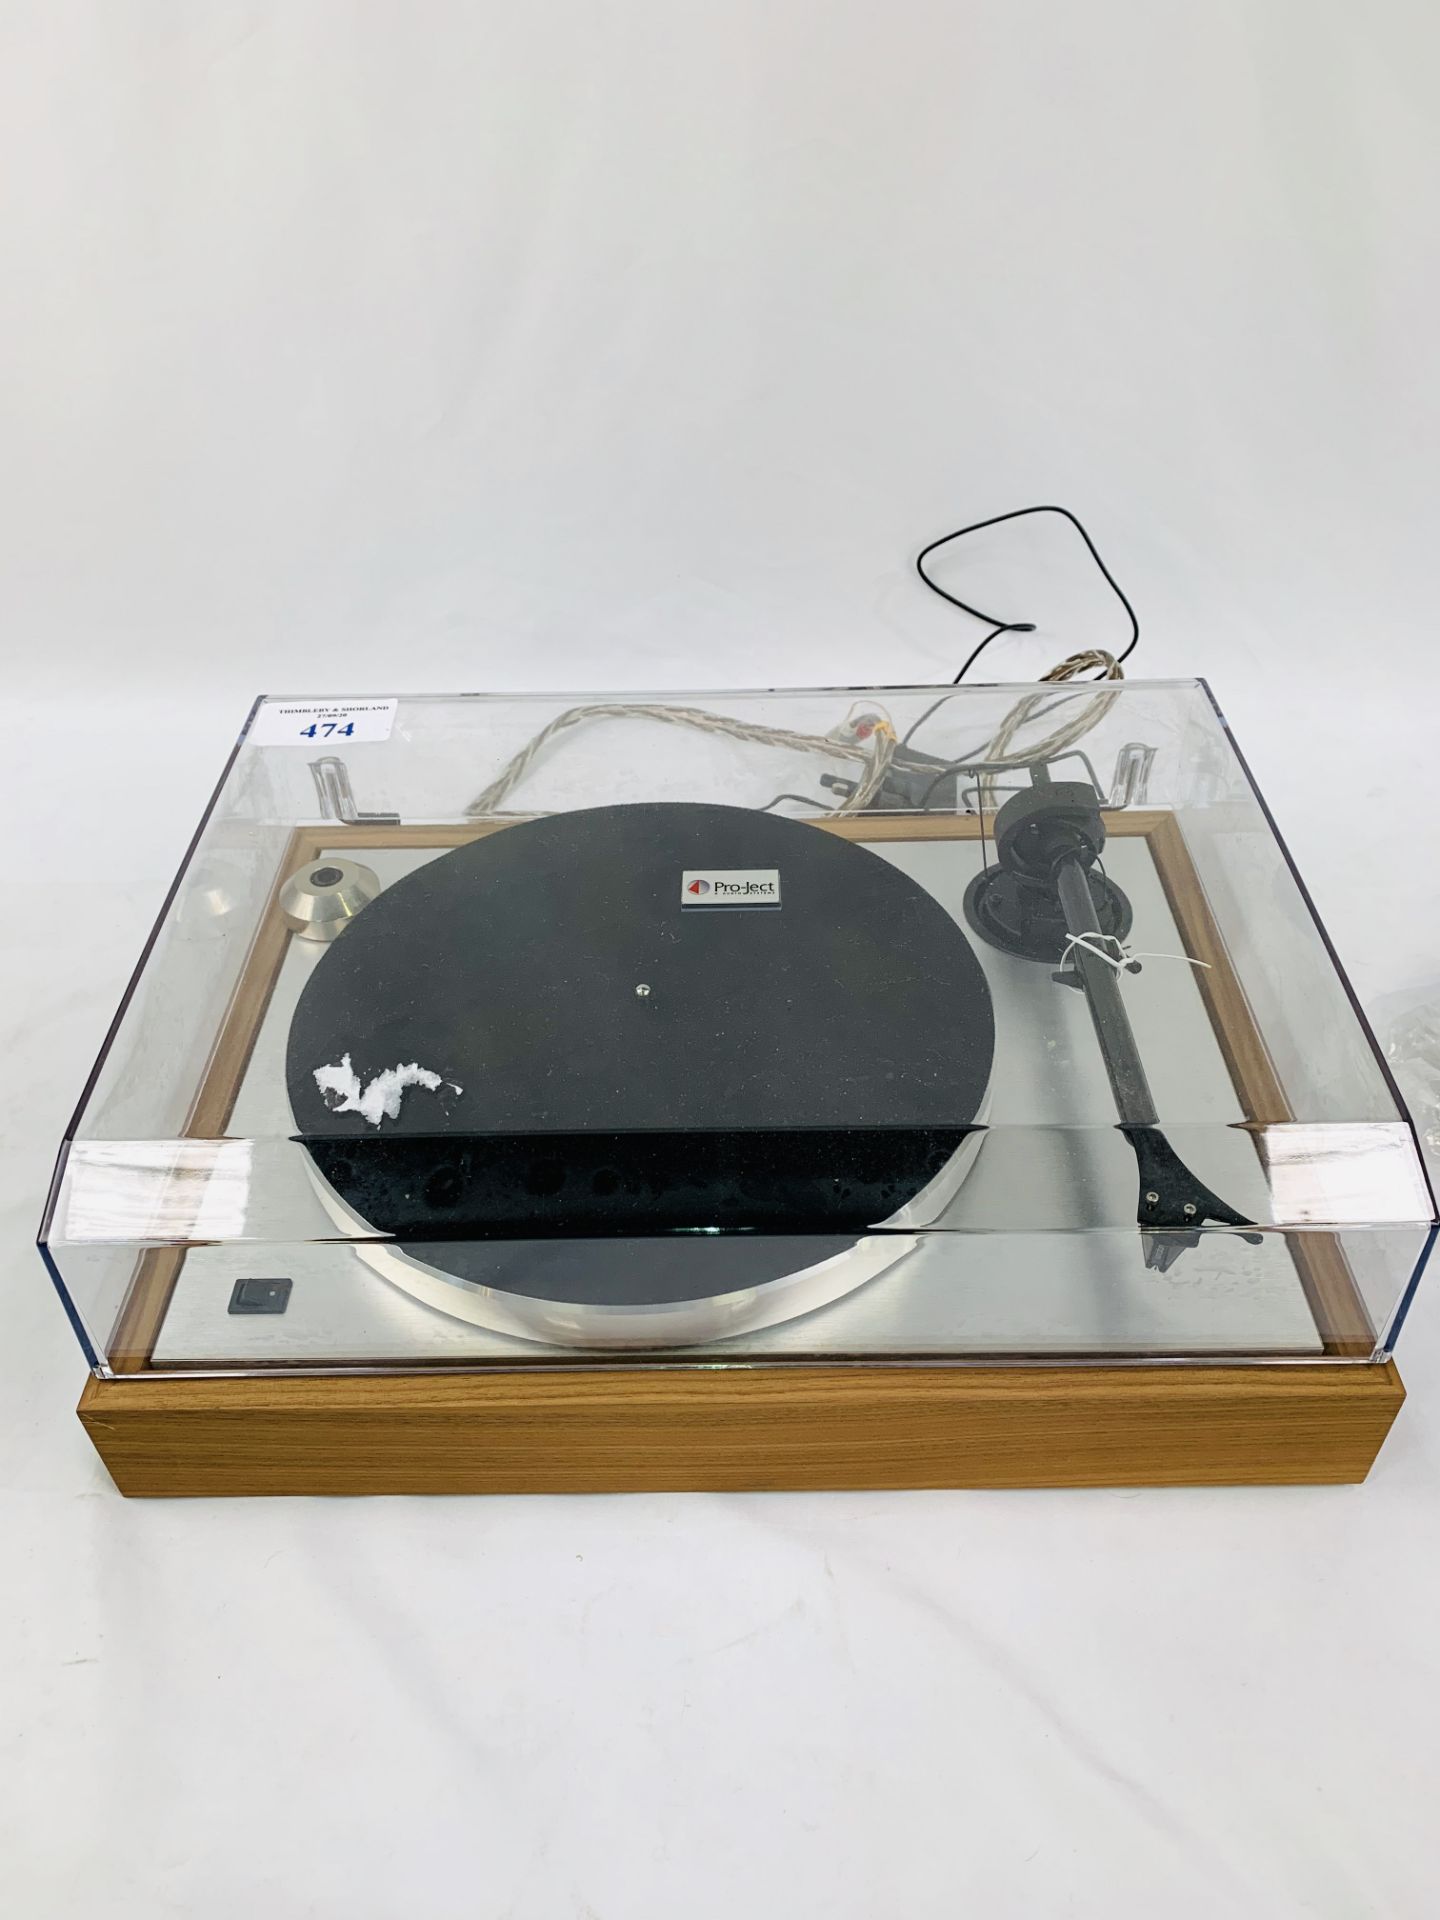 Pro-Ject 'The Classic' turntable complete with power supply, stylus and instruction manual.